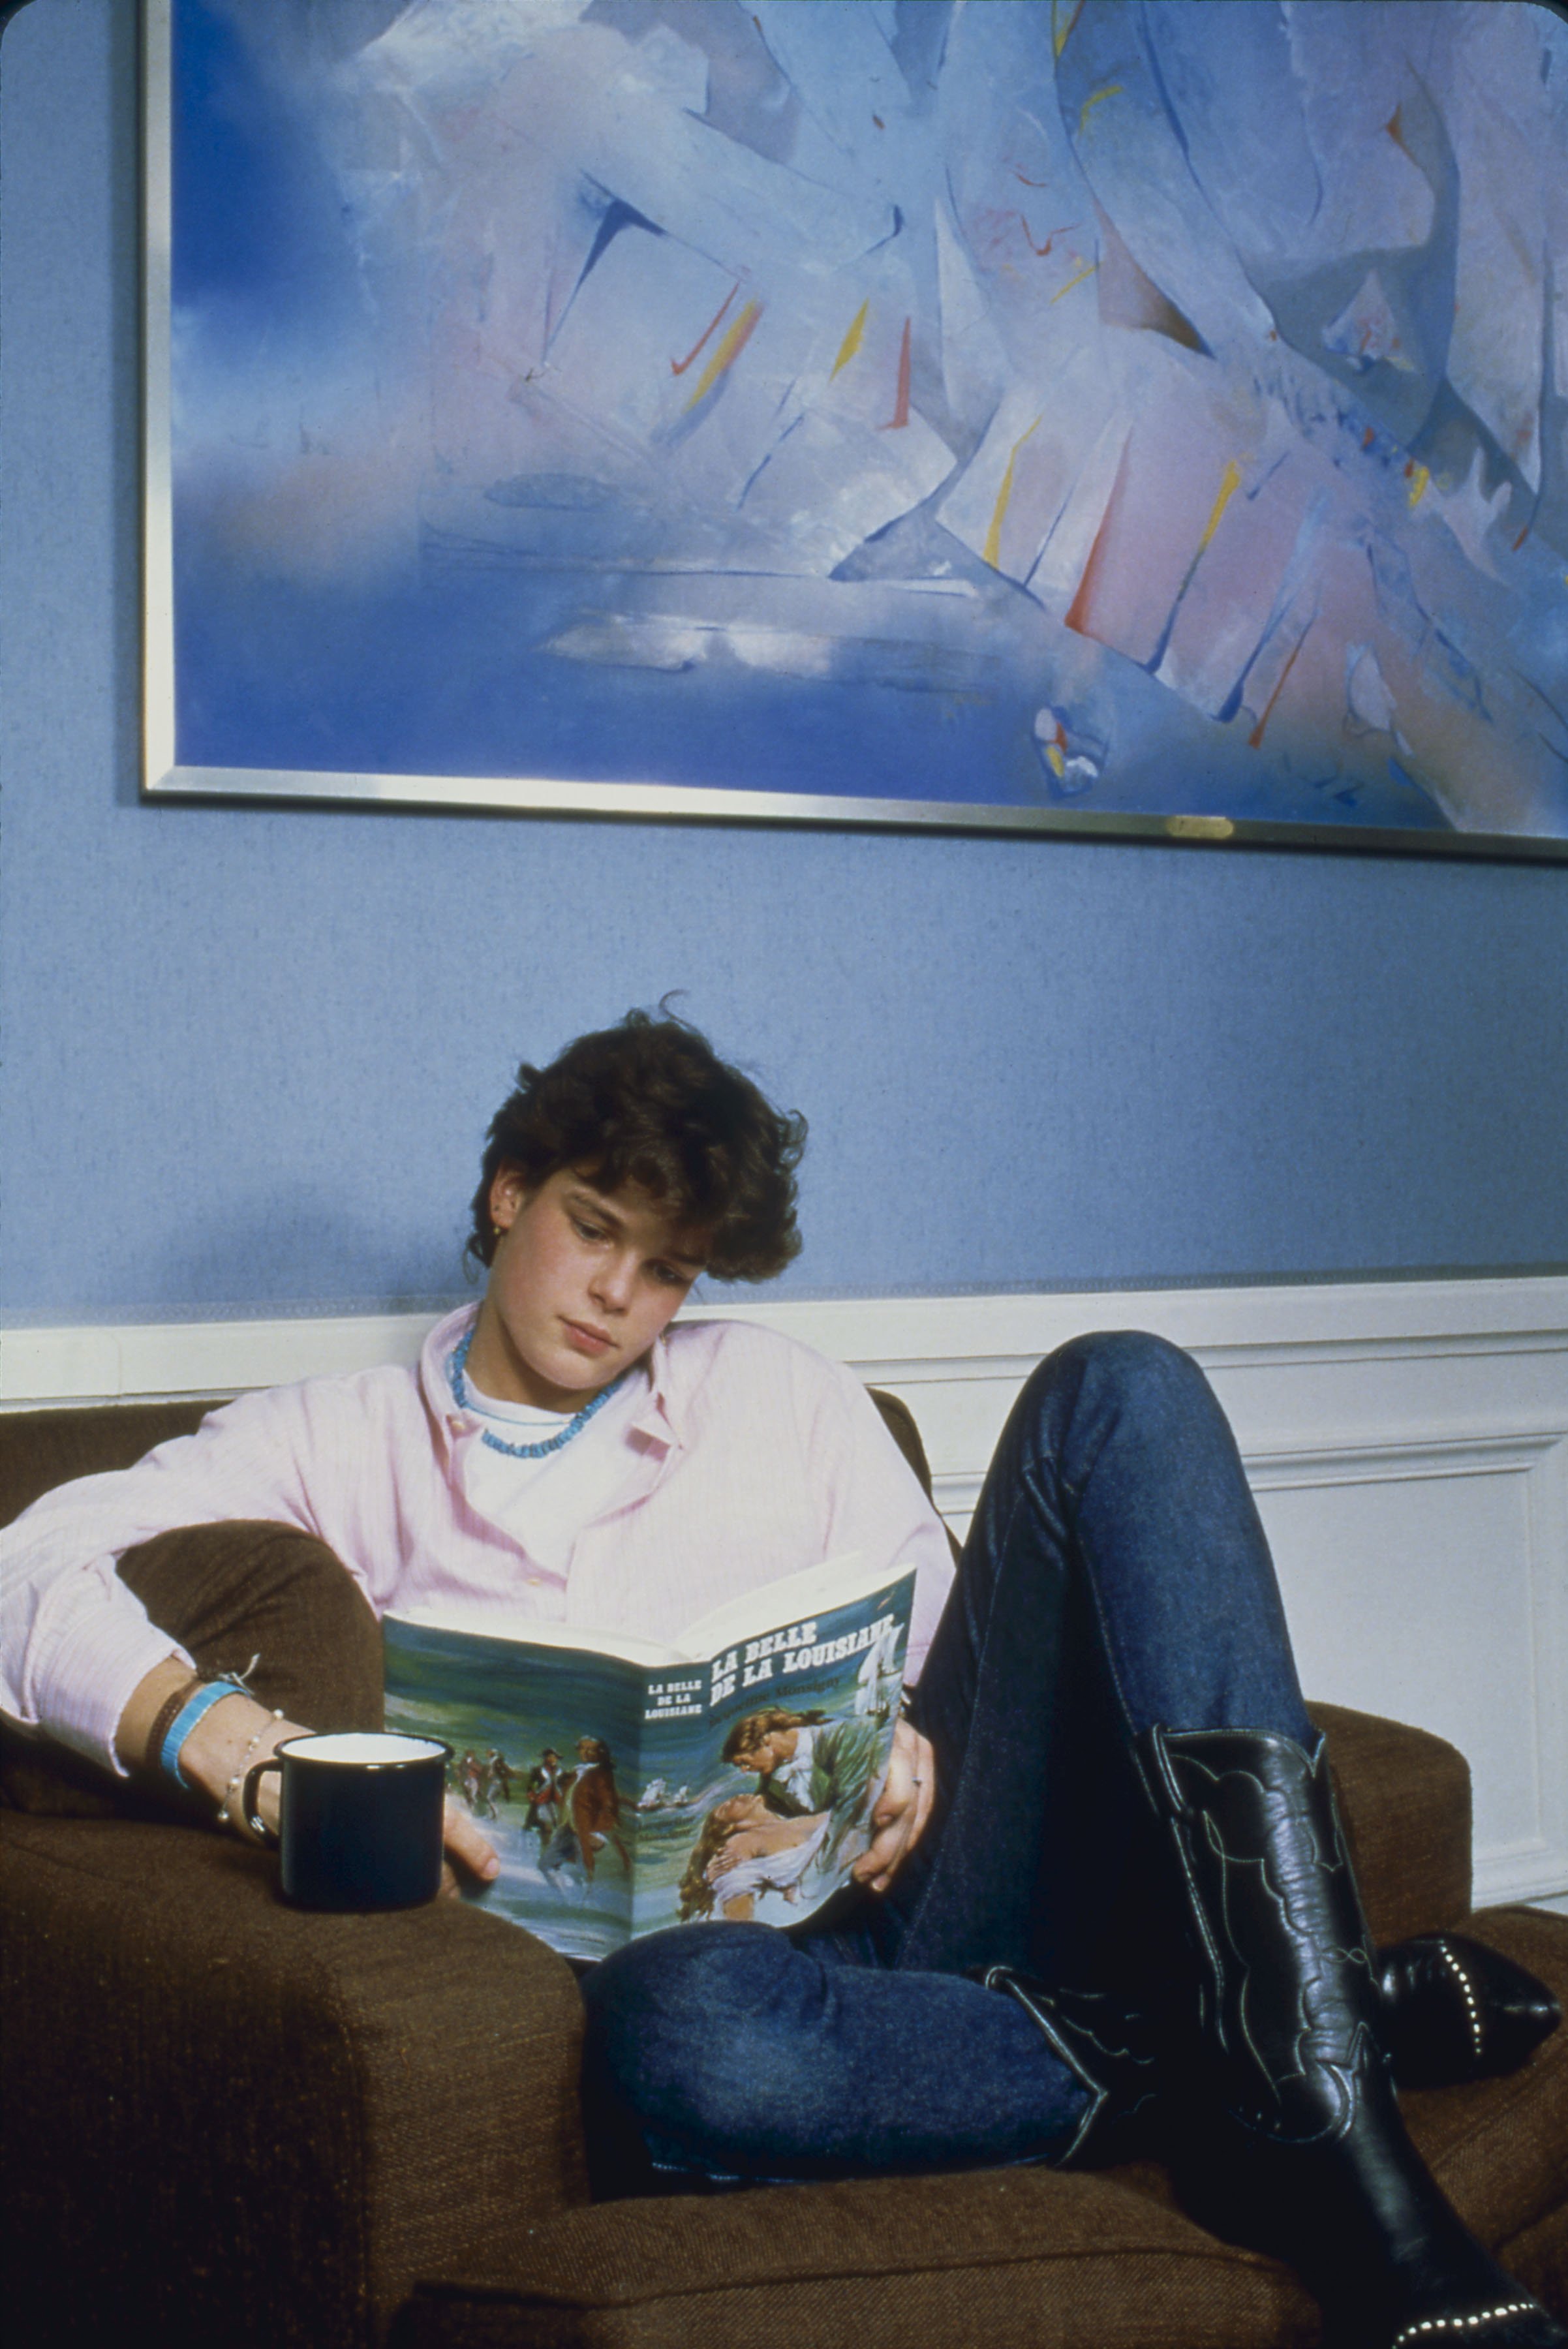 Princess Stephanie reading a book while sitting on a coach with her legs crossed. / Source: Getty Images